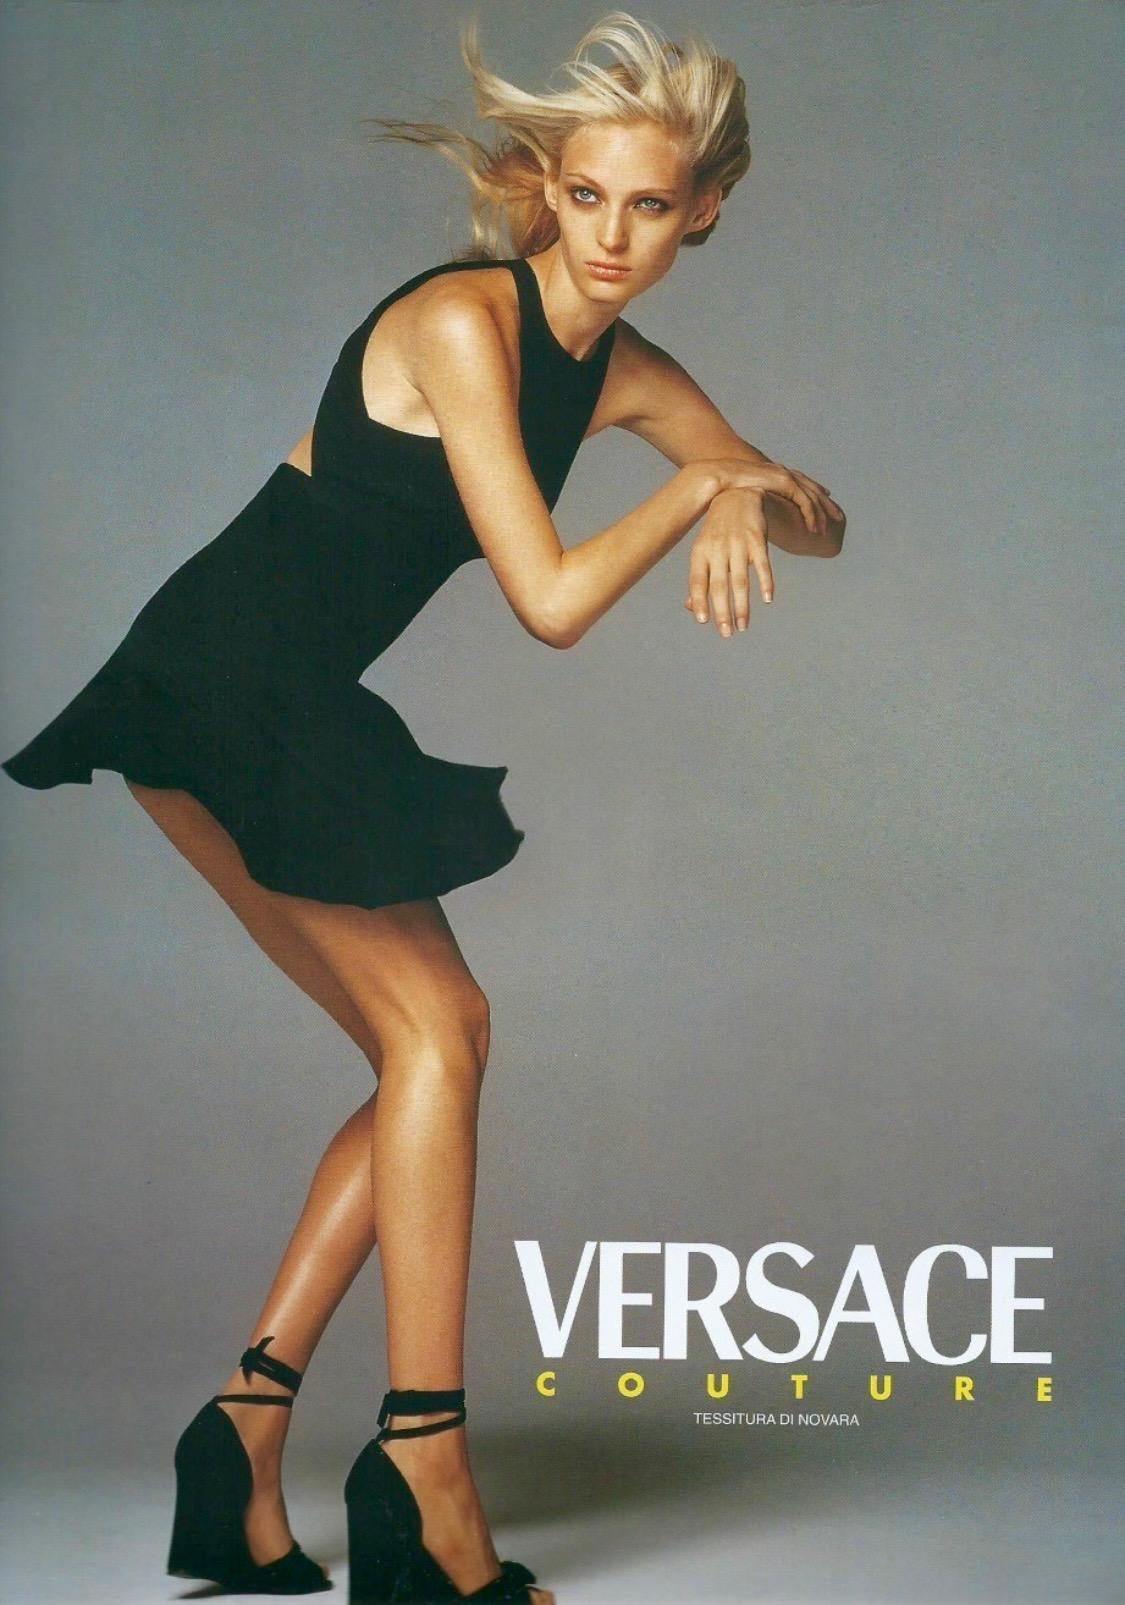 Presenting a navy silk Gianni Versace Couture dress, designed by Gianni Versace. From the Spring/Summer 1997 collection, this dress debuted as look 50 on the season's runway on Amber Valletta and the season's ad campaign on Amy Wesson, photographed